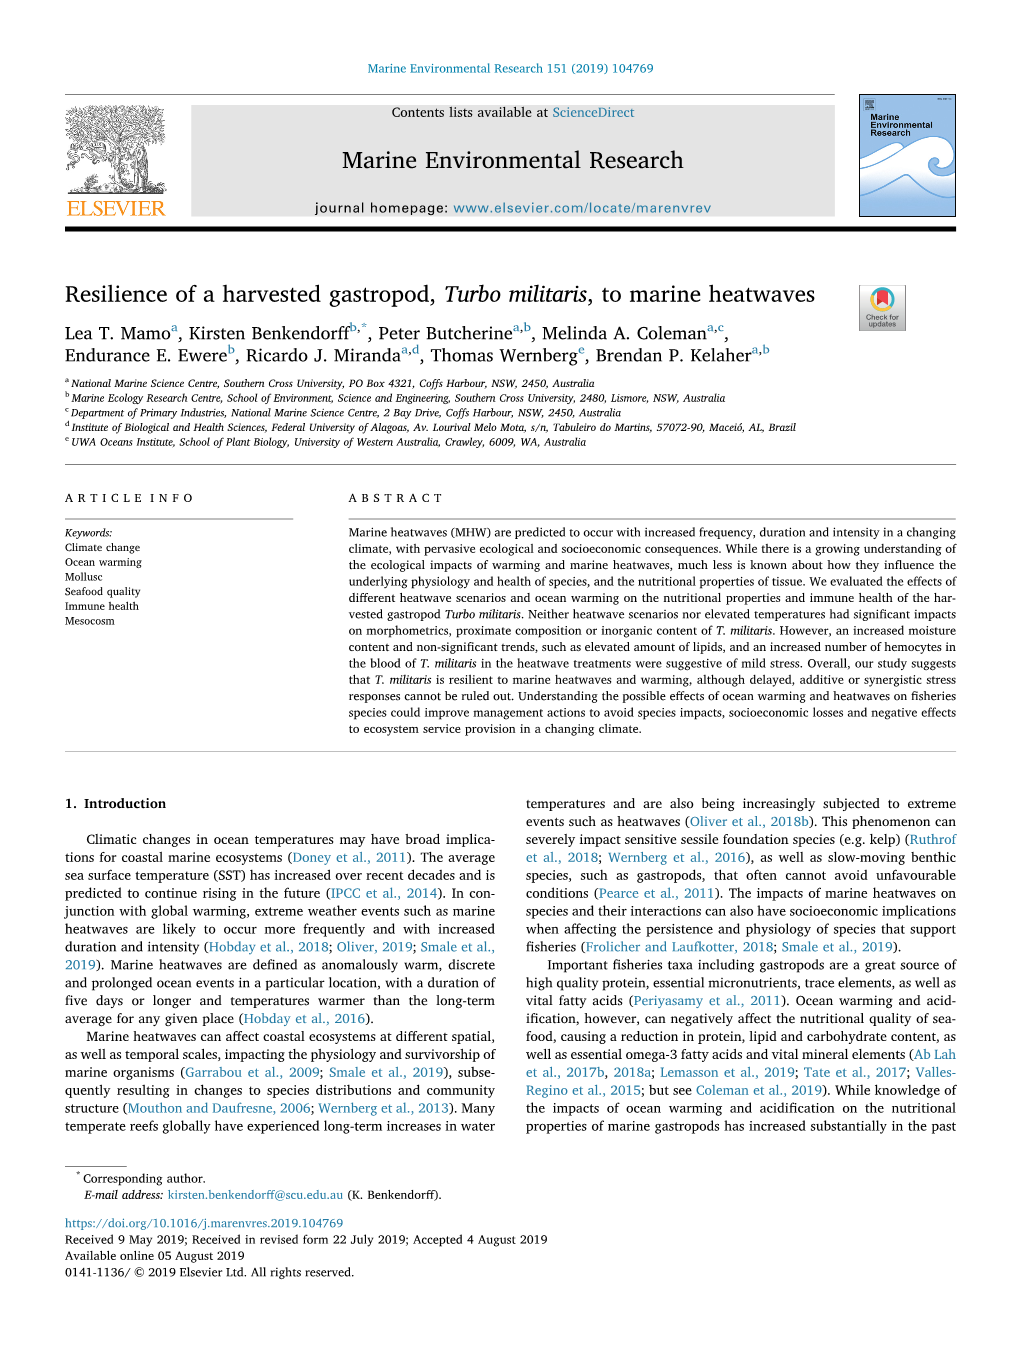 Resilience of a Harvested Gastropod, Turbo Militaris, to Marine Heatwaves T Lea T